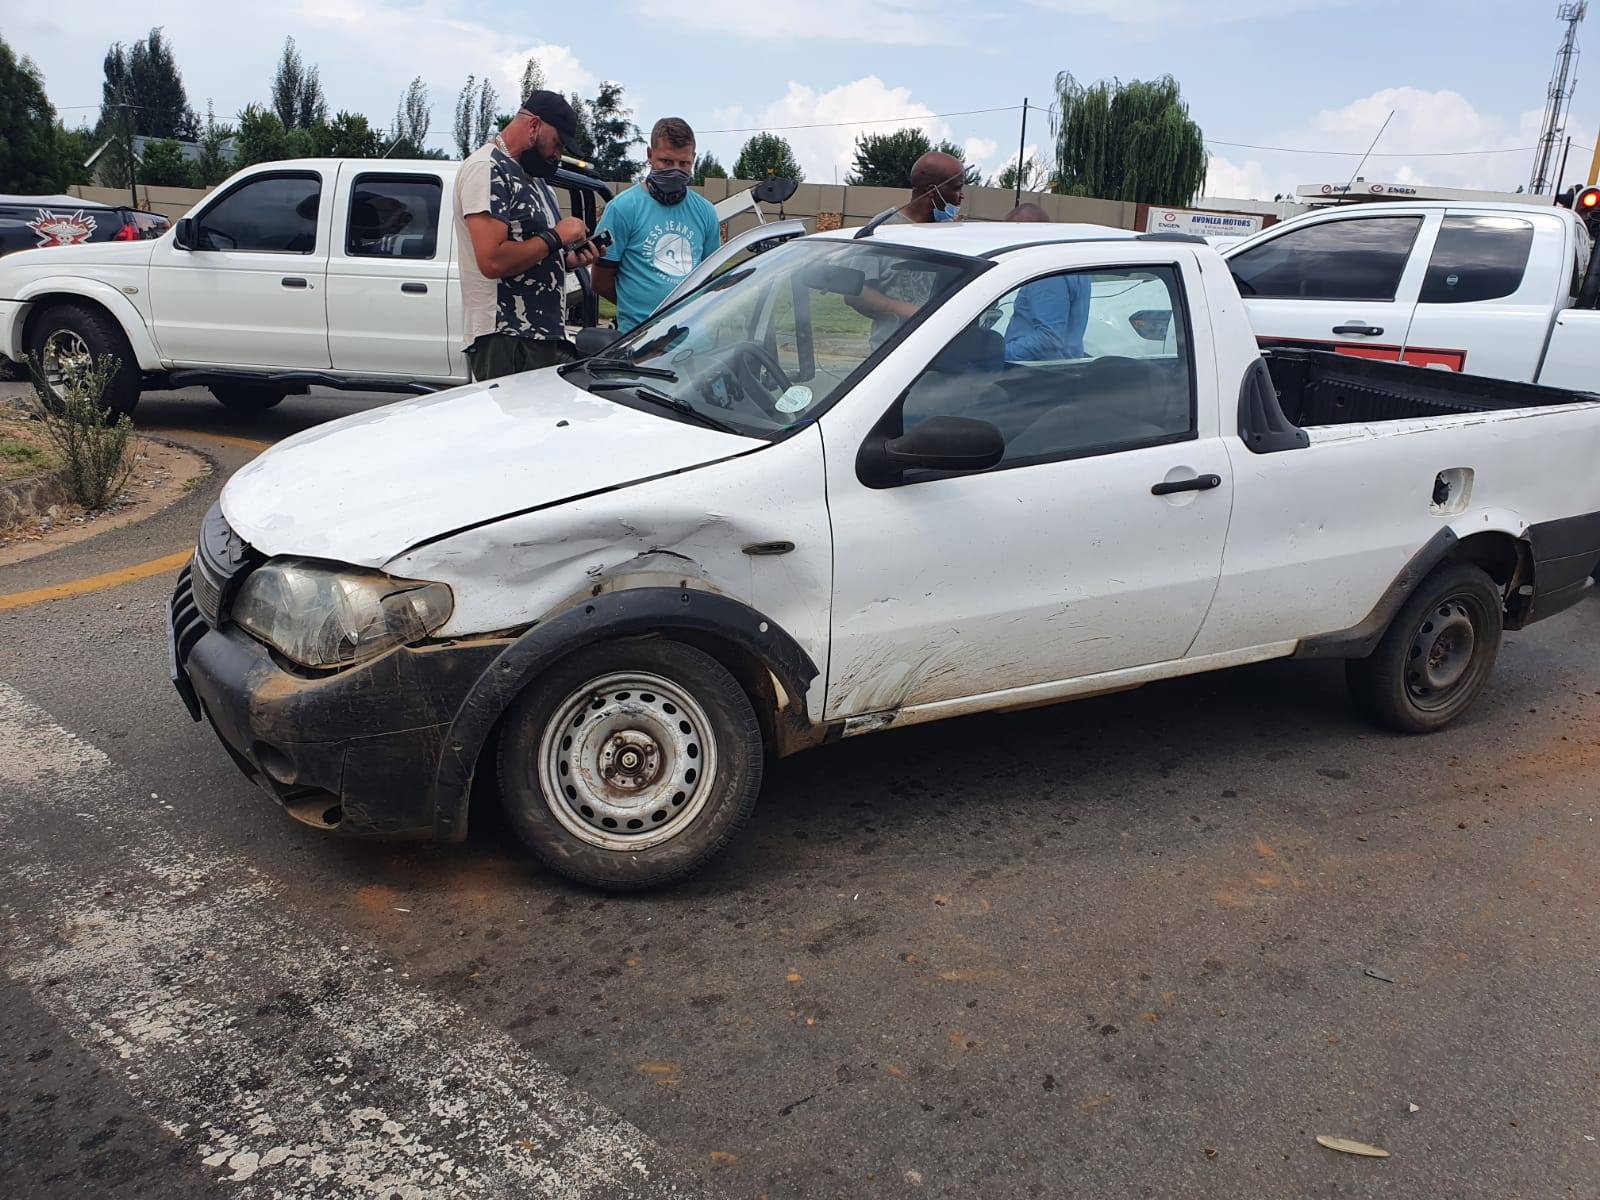 Two injured in a collision in Kempton Park